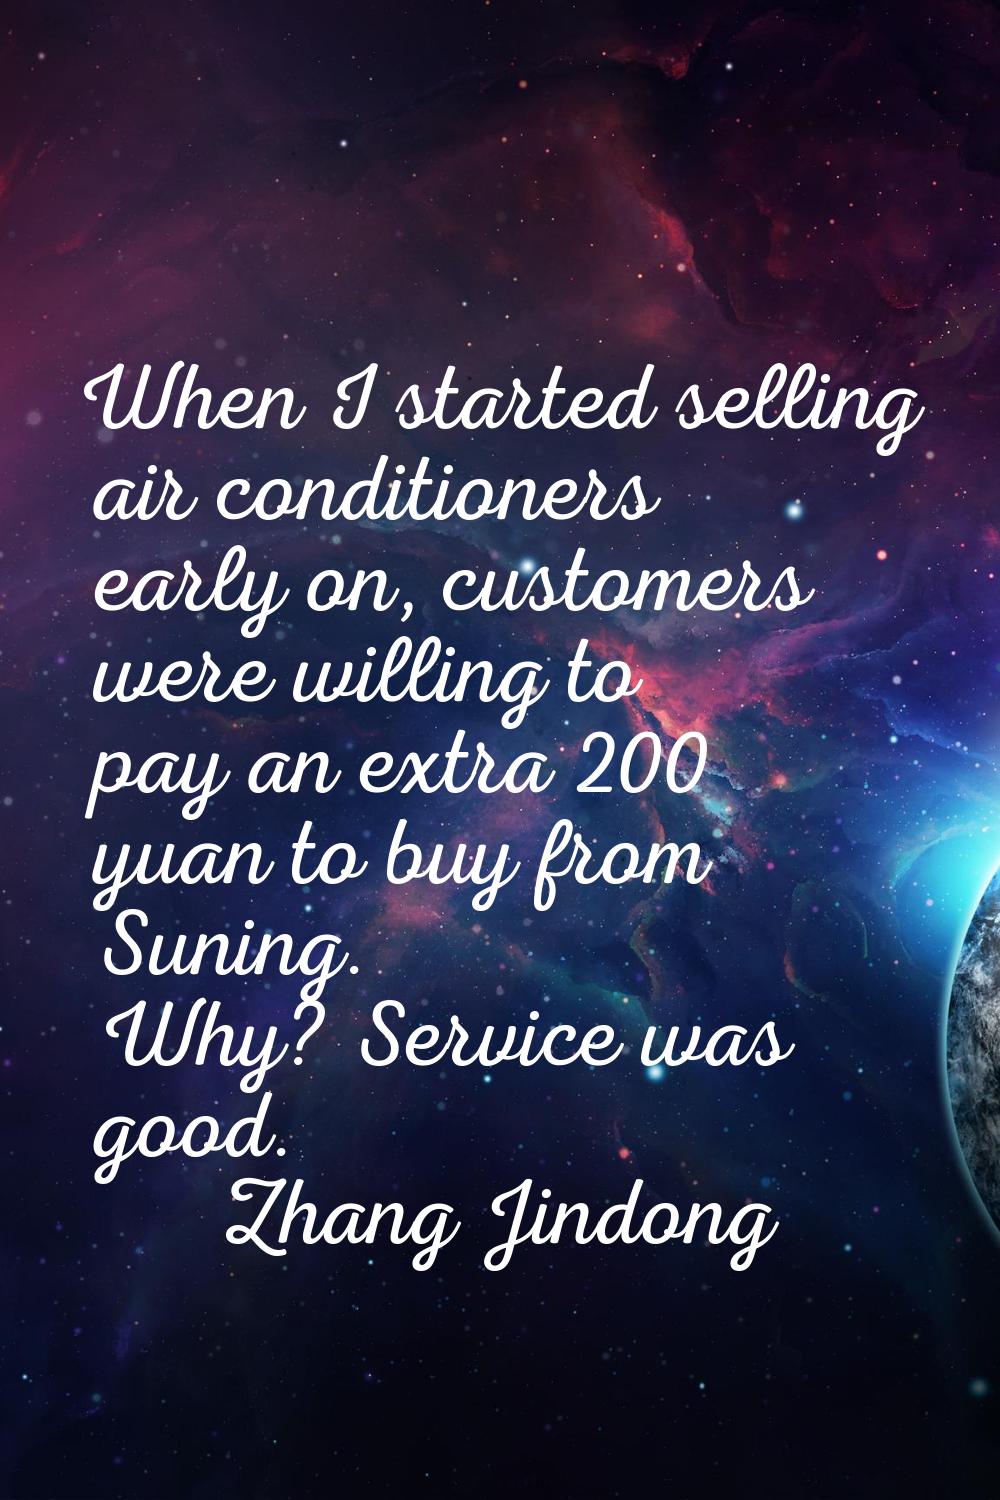 When I started selling air conditioners early on, customers were willing to pay an extra 200 yuan t